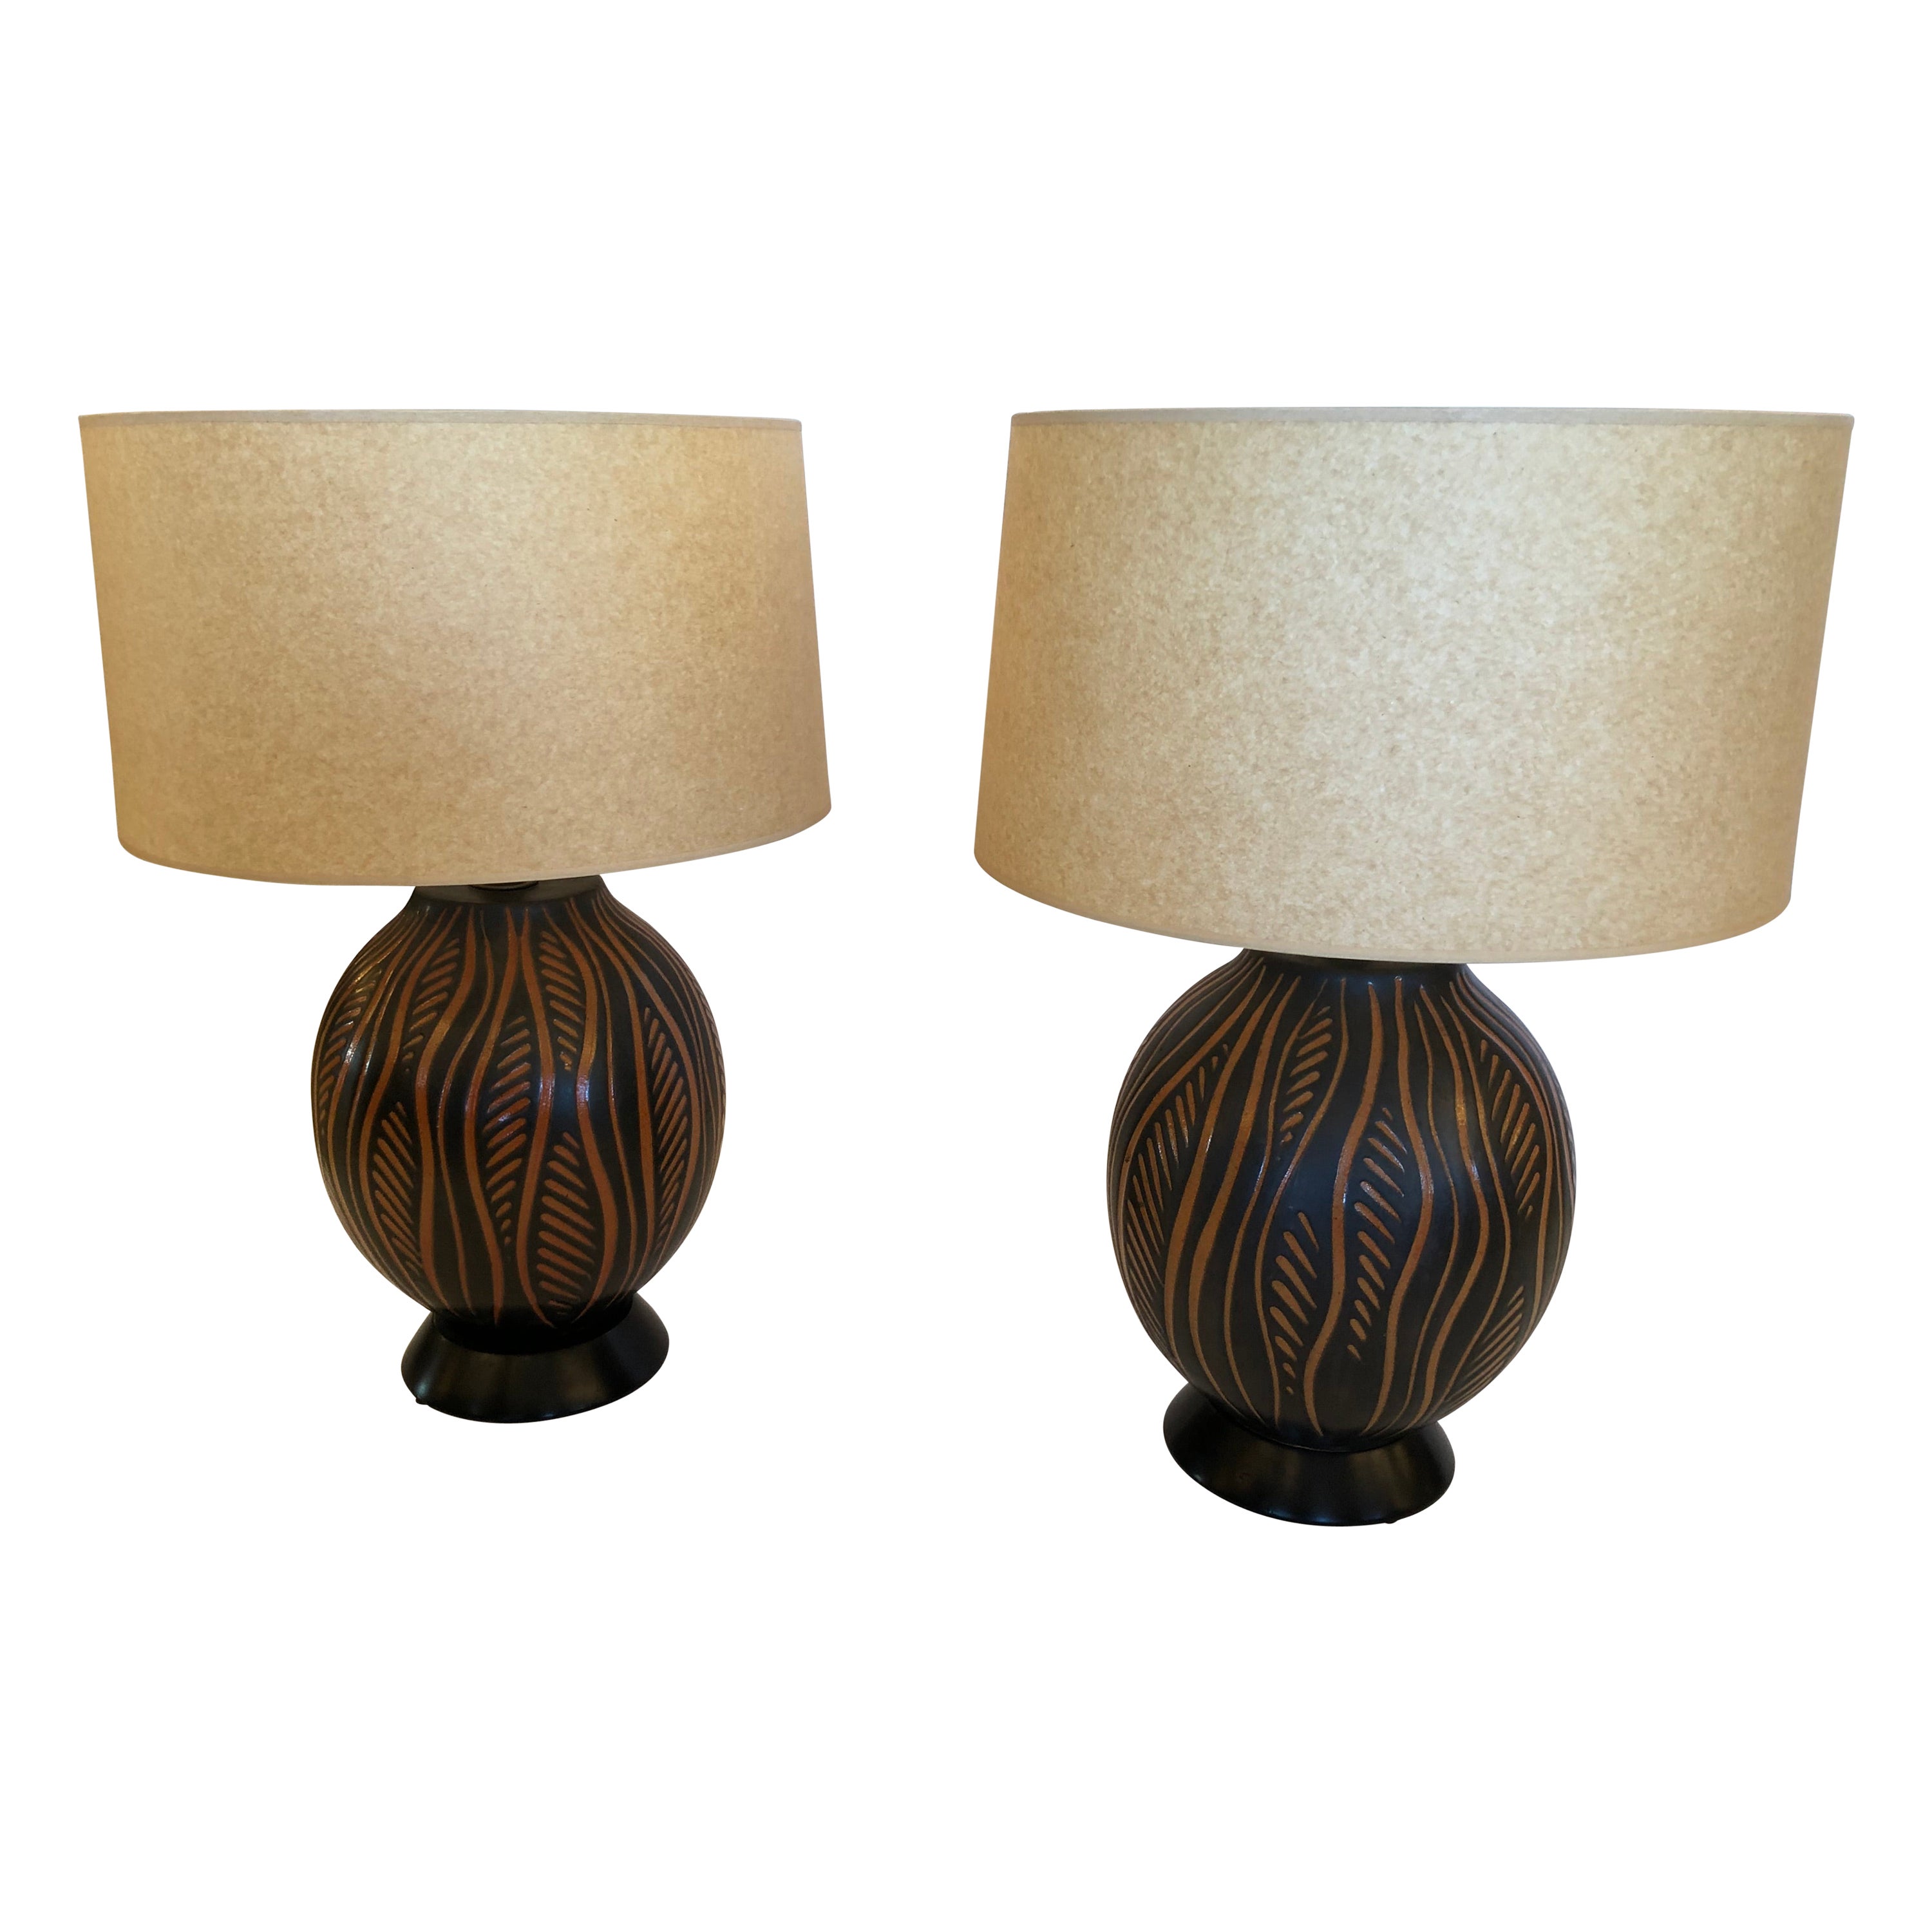 Handsome Pair of Black & Orange Hand Crafted Pottery Table Lamps For Sale